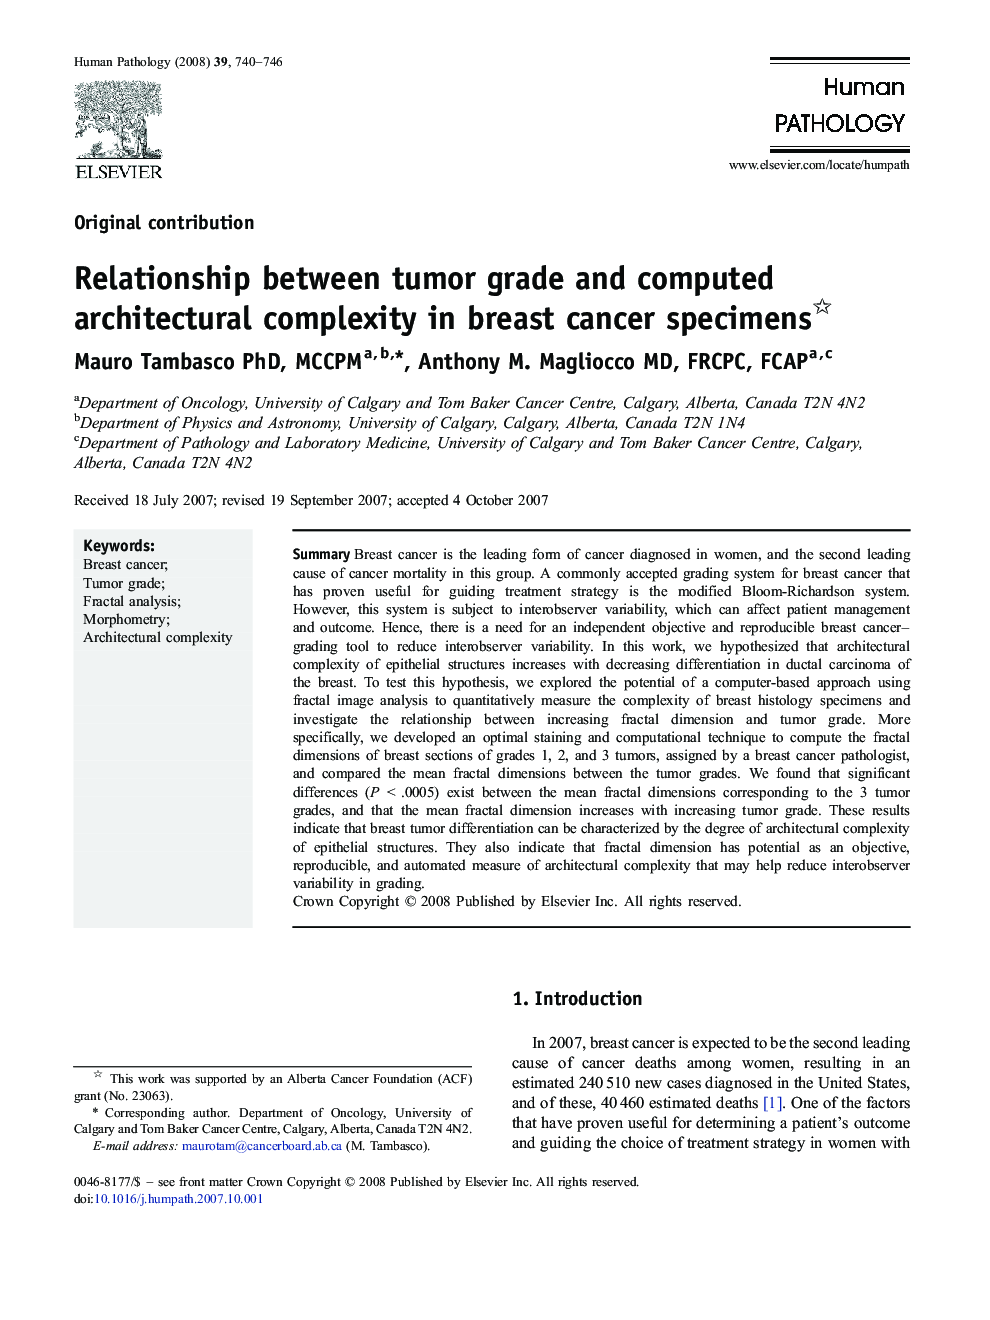 Relationship between tumor grade and computed architectural complexity in breast cancer specimens